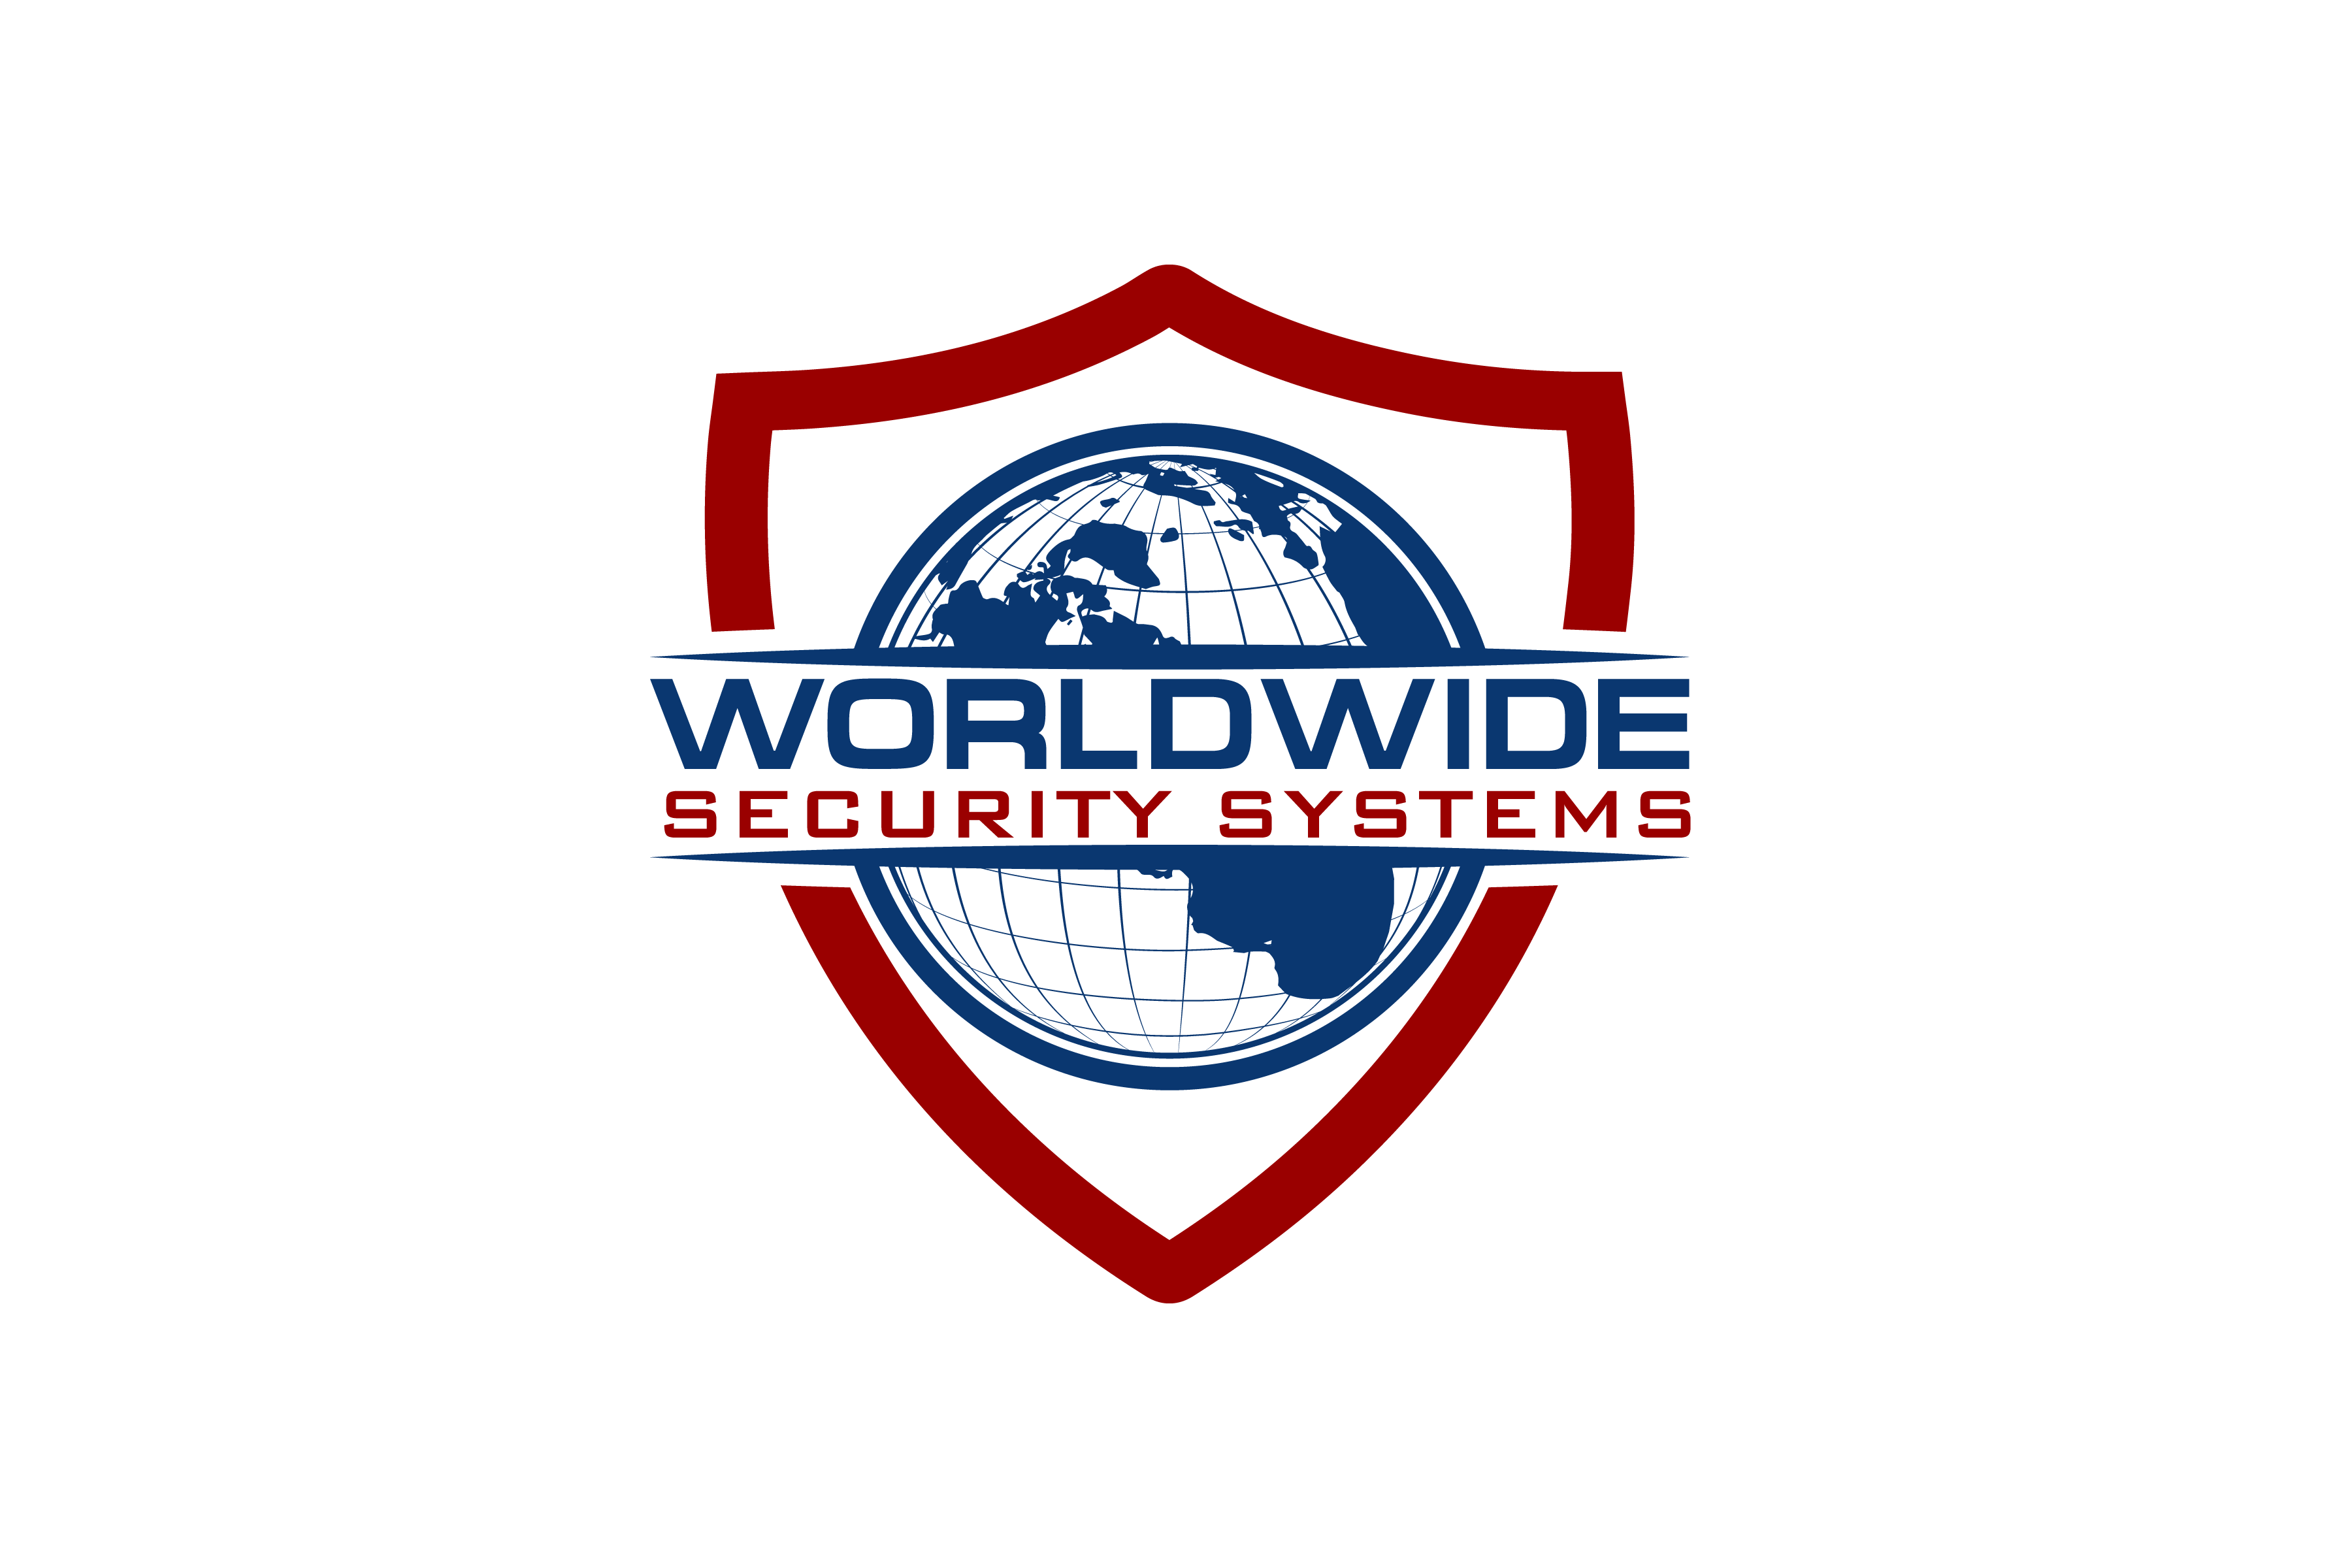 Worldwide Security Systems